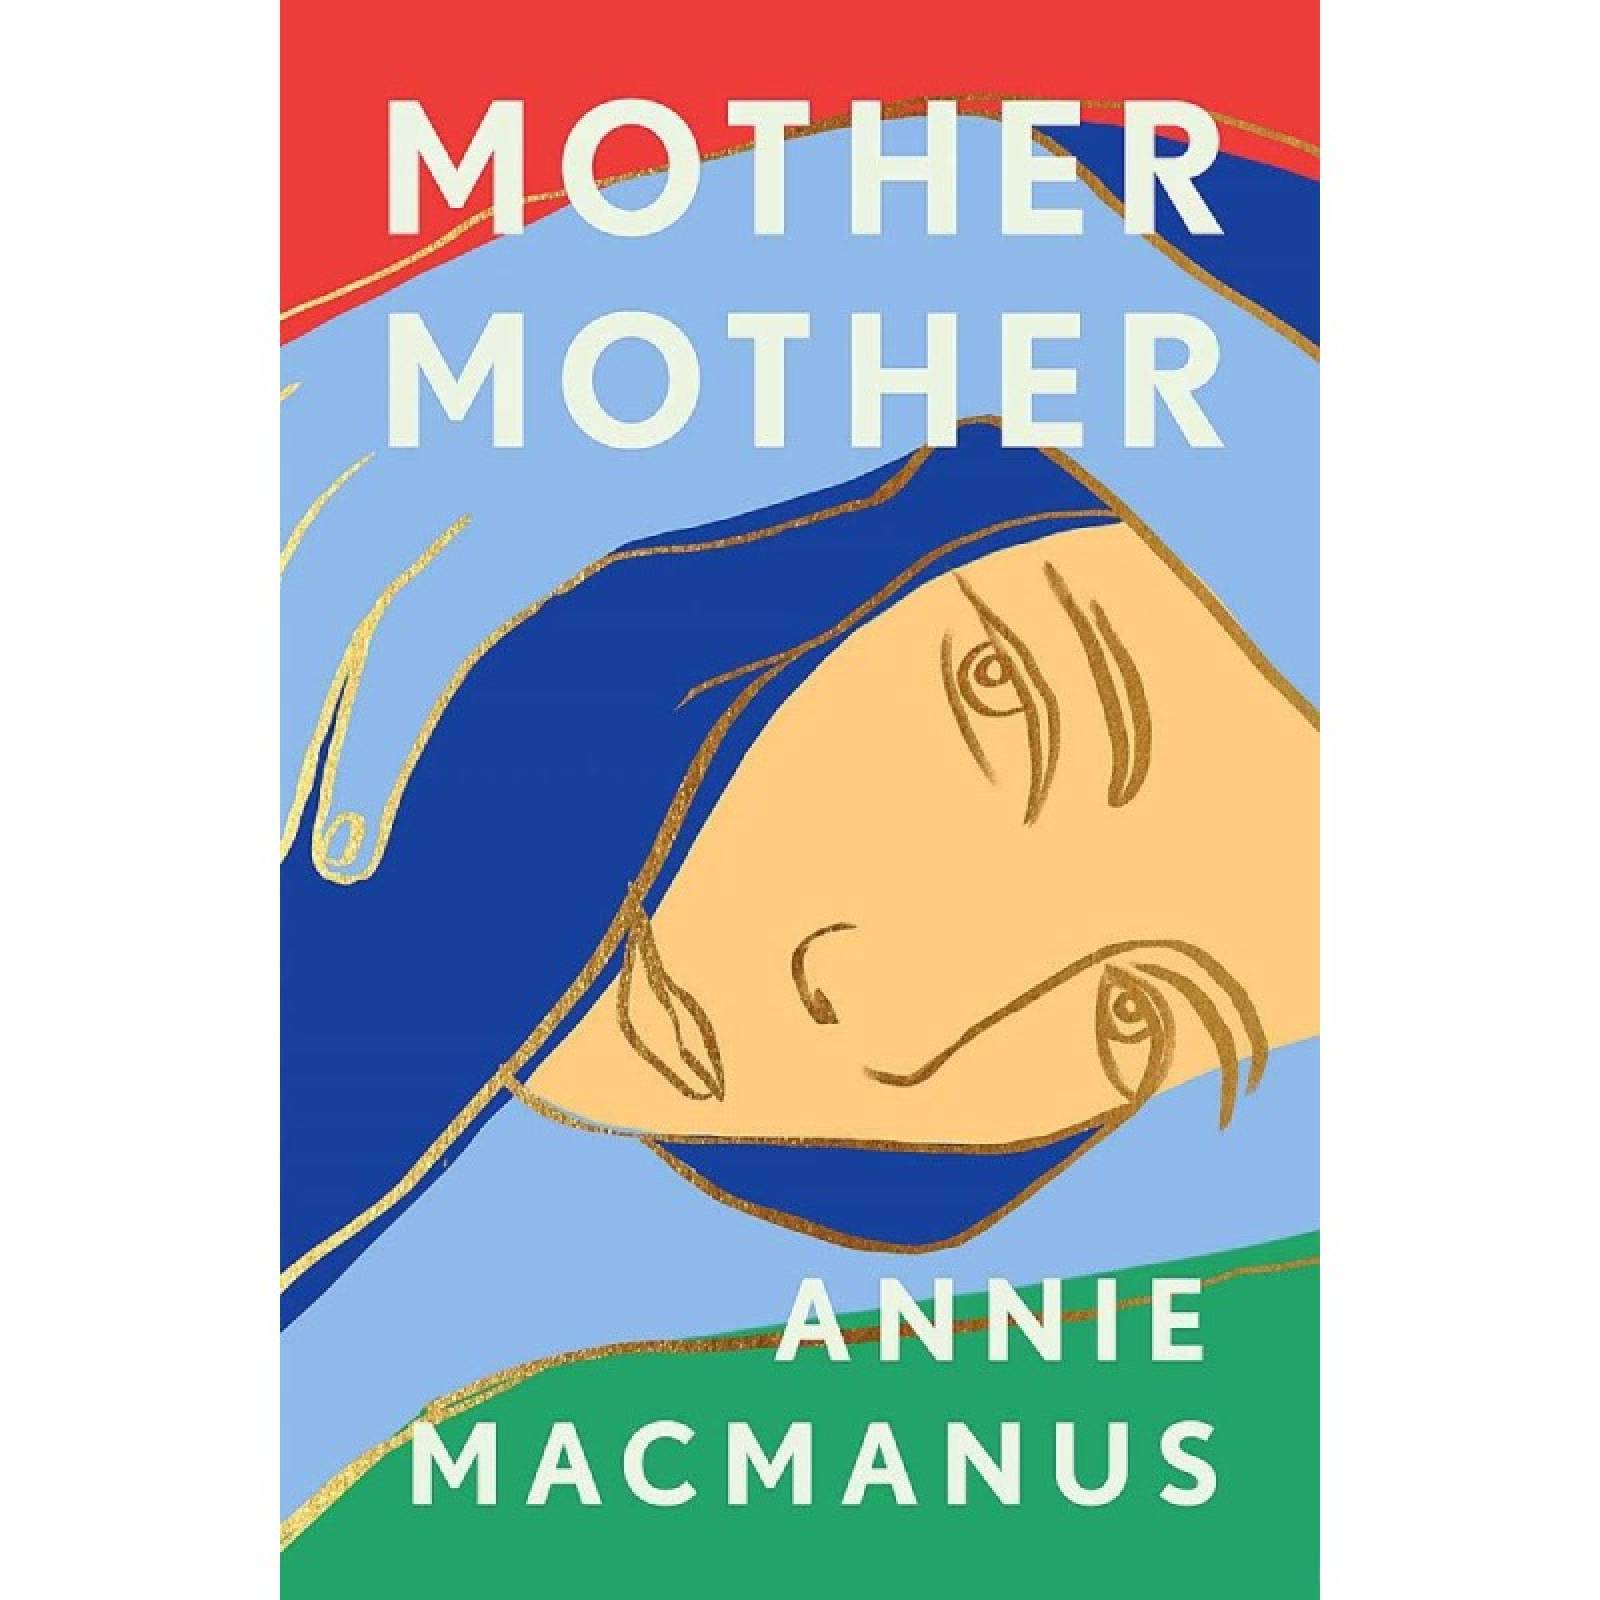 Mother Mother By Annie Macmanus - Paperback Book